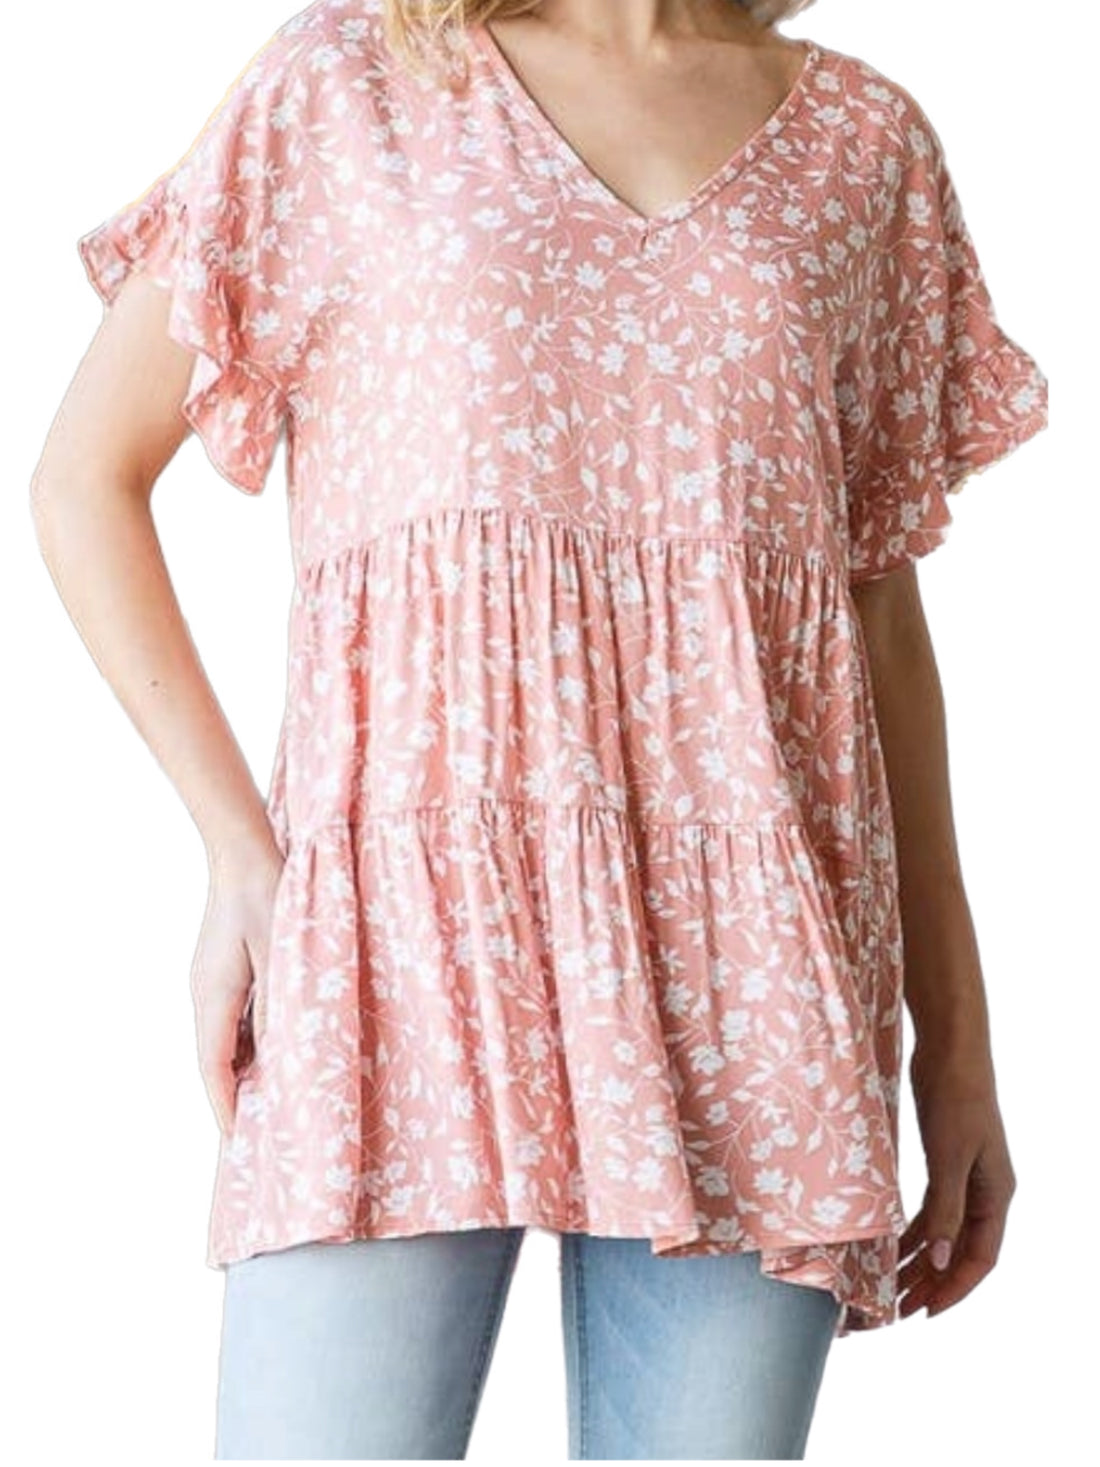 Pink Floral Baby Doll Top